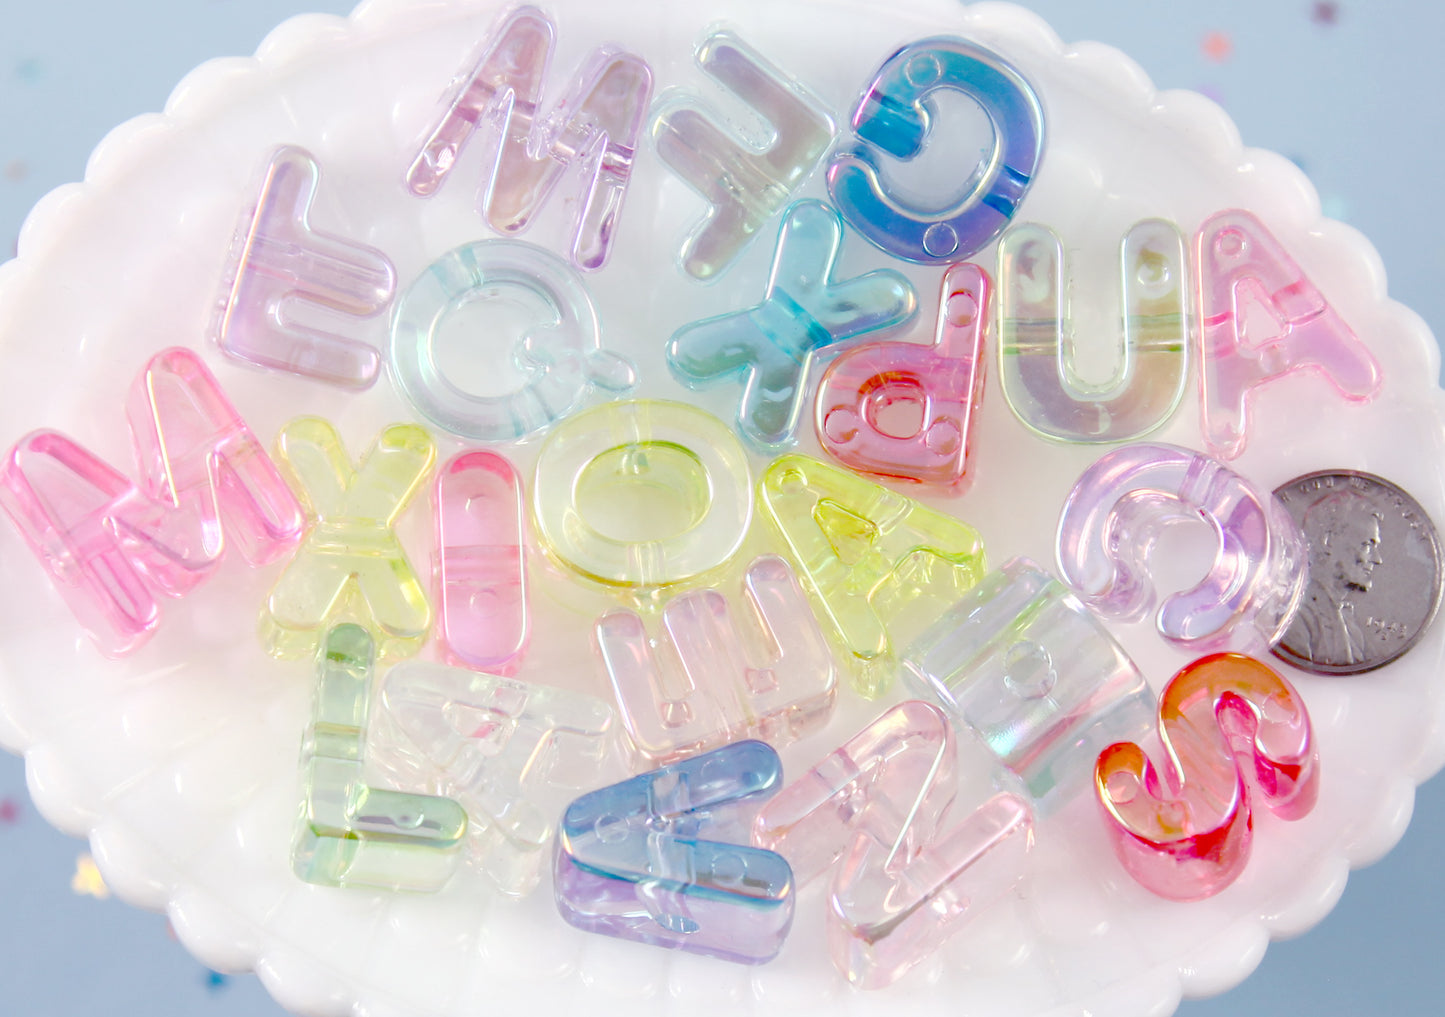 Letter Beads - 20mm Chunky Pastel AB Alphabet Letter Beads Resin or Acrylic Beads - approx. 100 pcs set